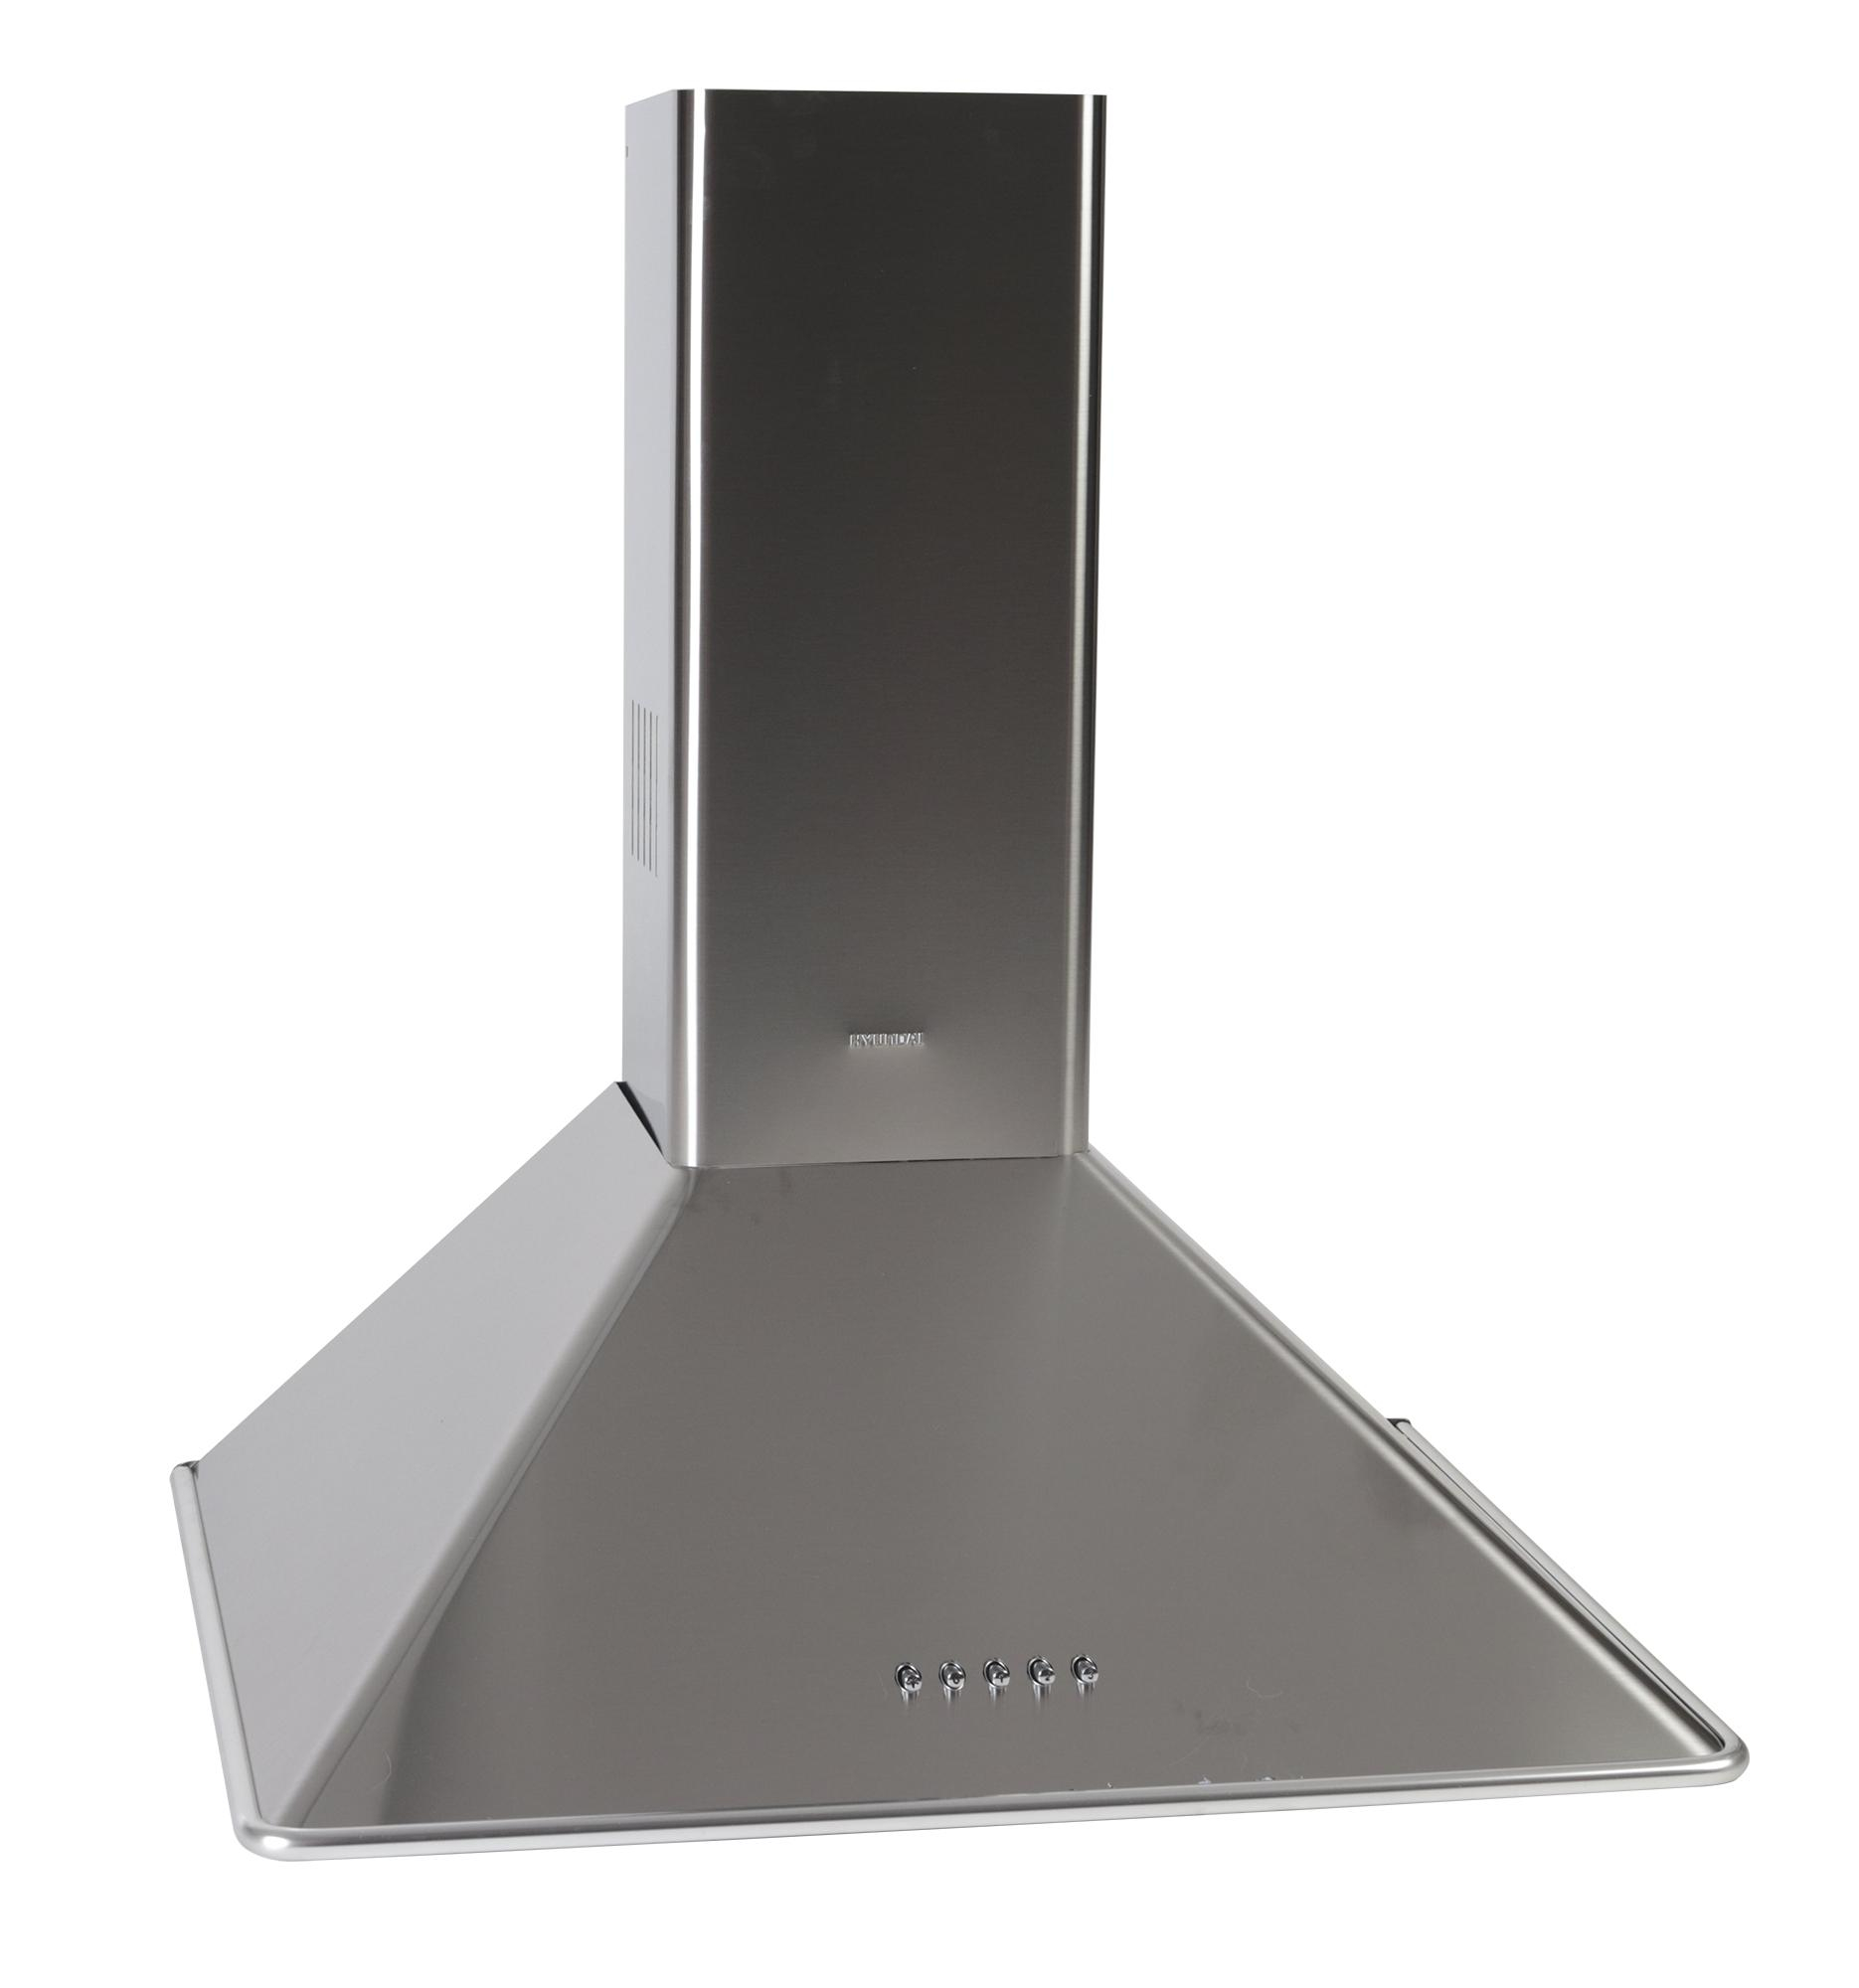 Hyundai Wall Mounted Cooker Hood Hch F603c intended for proportions 1870 X 2000